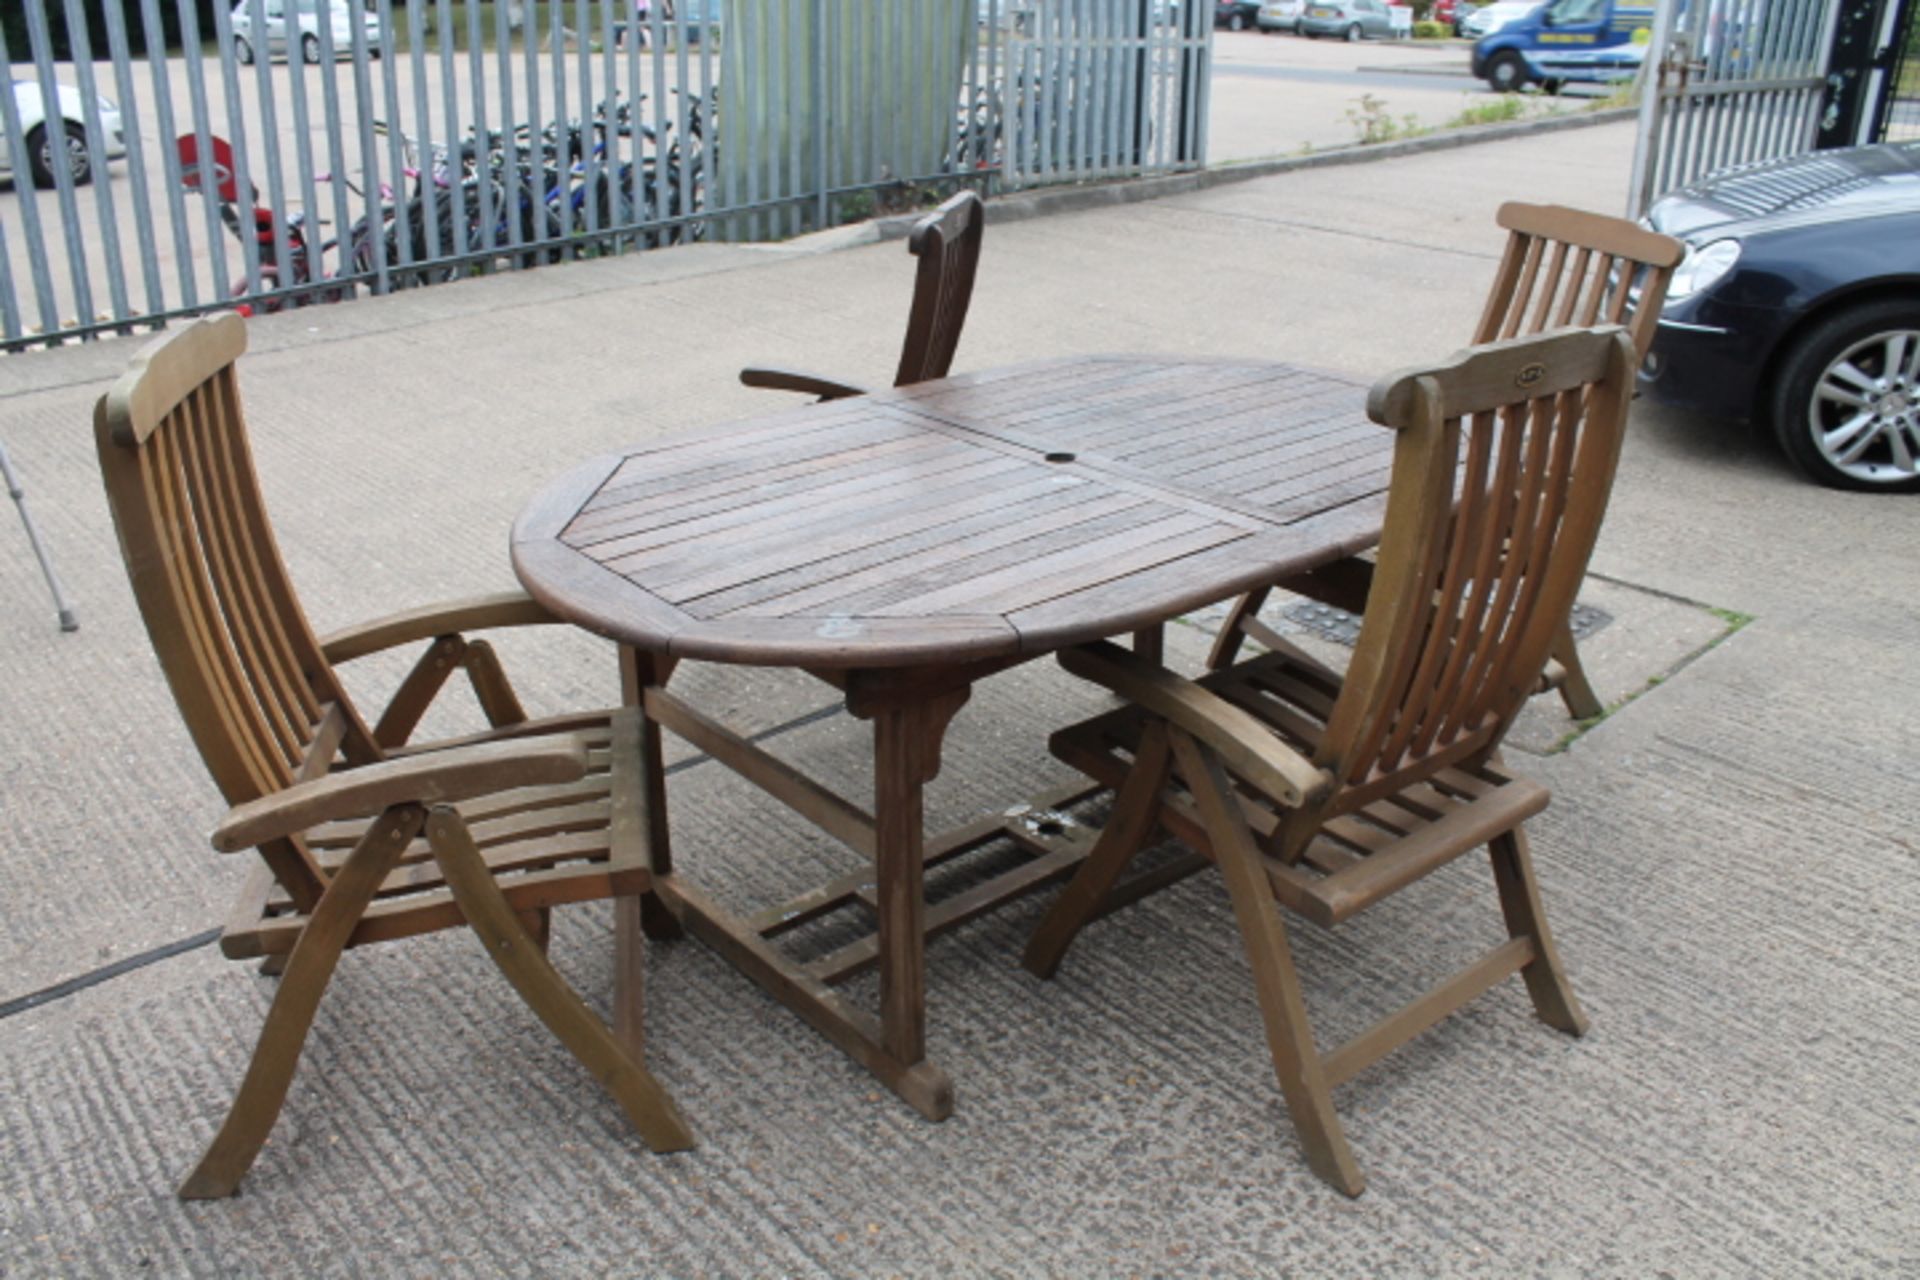 6ft x 4ft Approx Hardwood "APA" Garden Table Extends To 8ft Inc Four Folding Adjustable Lounger